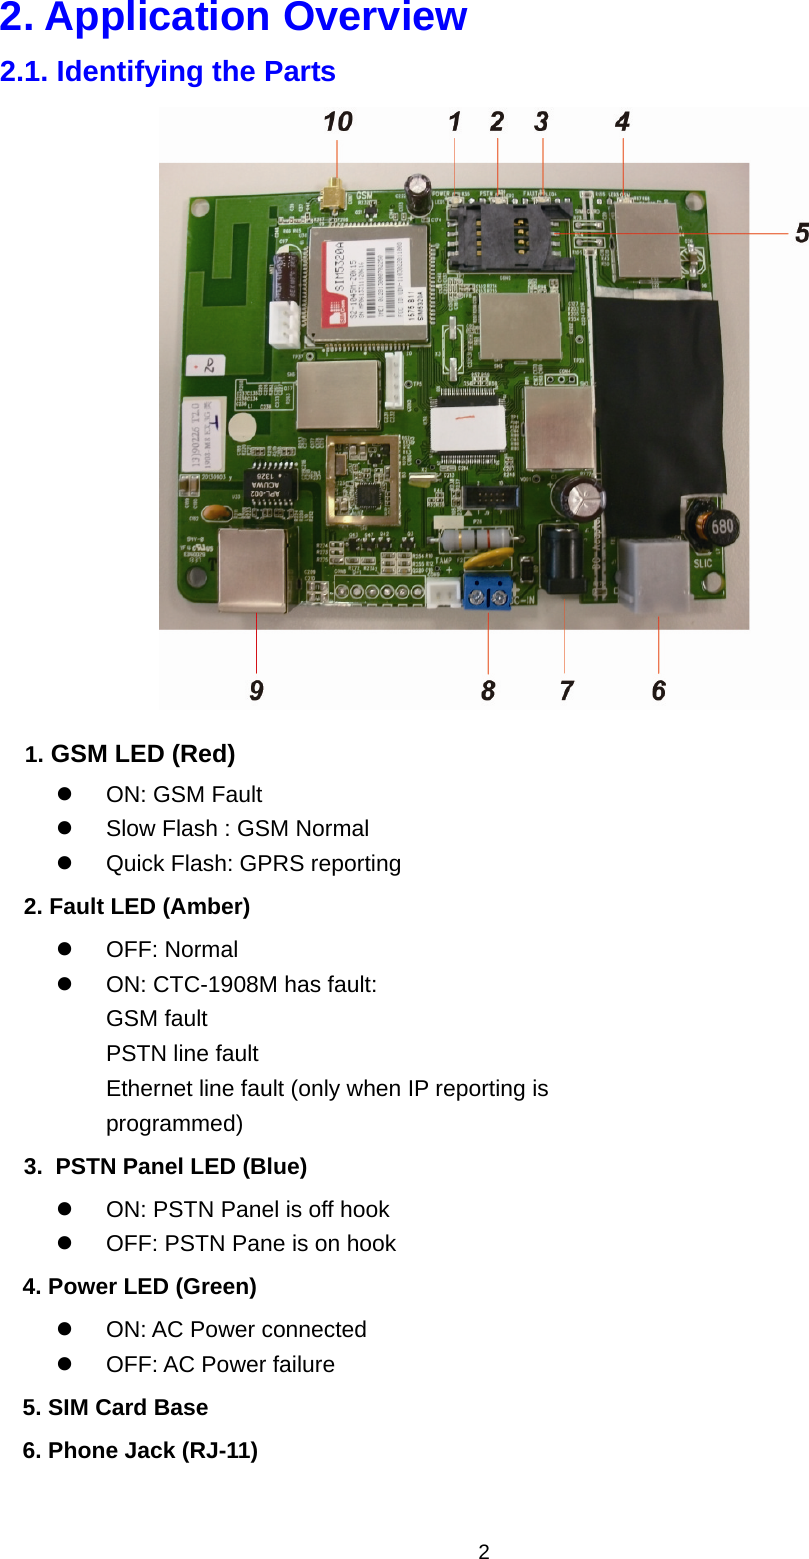  22. Application Overview 2.1. Identifying the Parts    1. GSM LED (Red)   ON: GSM Fault   Slow Flash : GSM Normal   Quick Flash: GPRS reporting   2. Fault LED (Amber)    OFF: Normal   ON: CTC-1908M has fault: GSM fault PSTN line fault Ethernet line fault (only when IP reporting is programmed)   3. PSTN Panel LED (Blue)   ON: PSTN Panel is off hook   OFF: PSTN Pane is on hook 4. Power LED (Green)  ON: AC Power connected   OFF: AC Power failure 5. SIM Card Base   6. Phone Jack (RJ-11) 